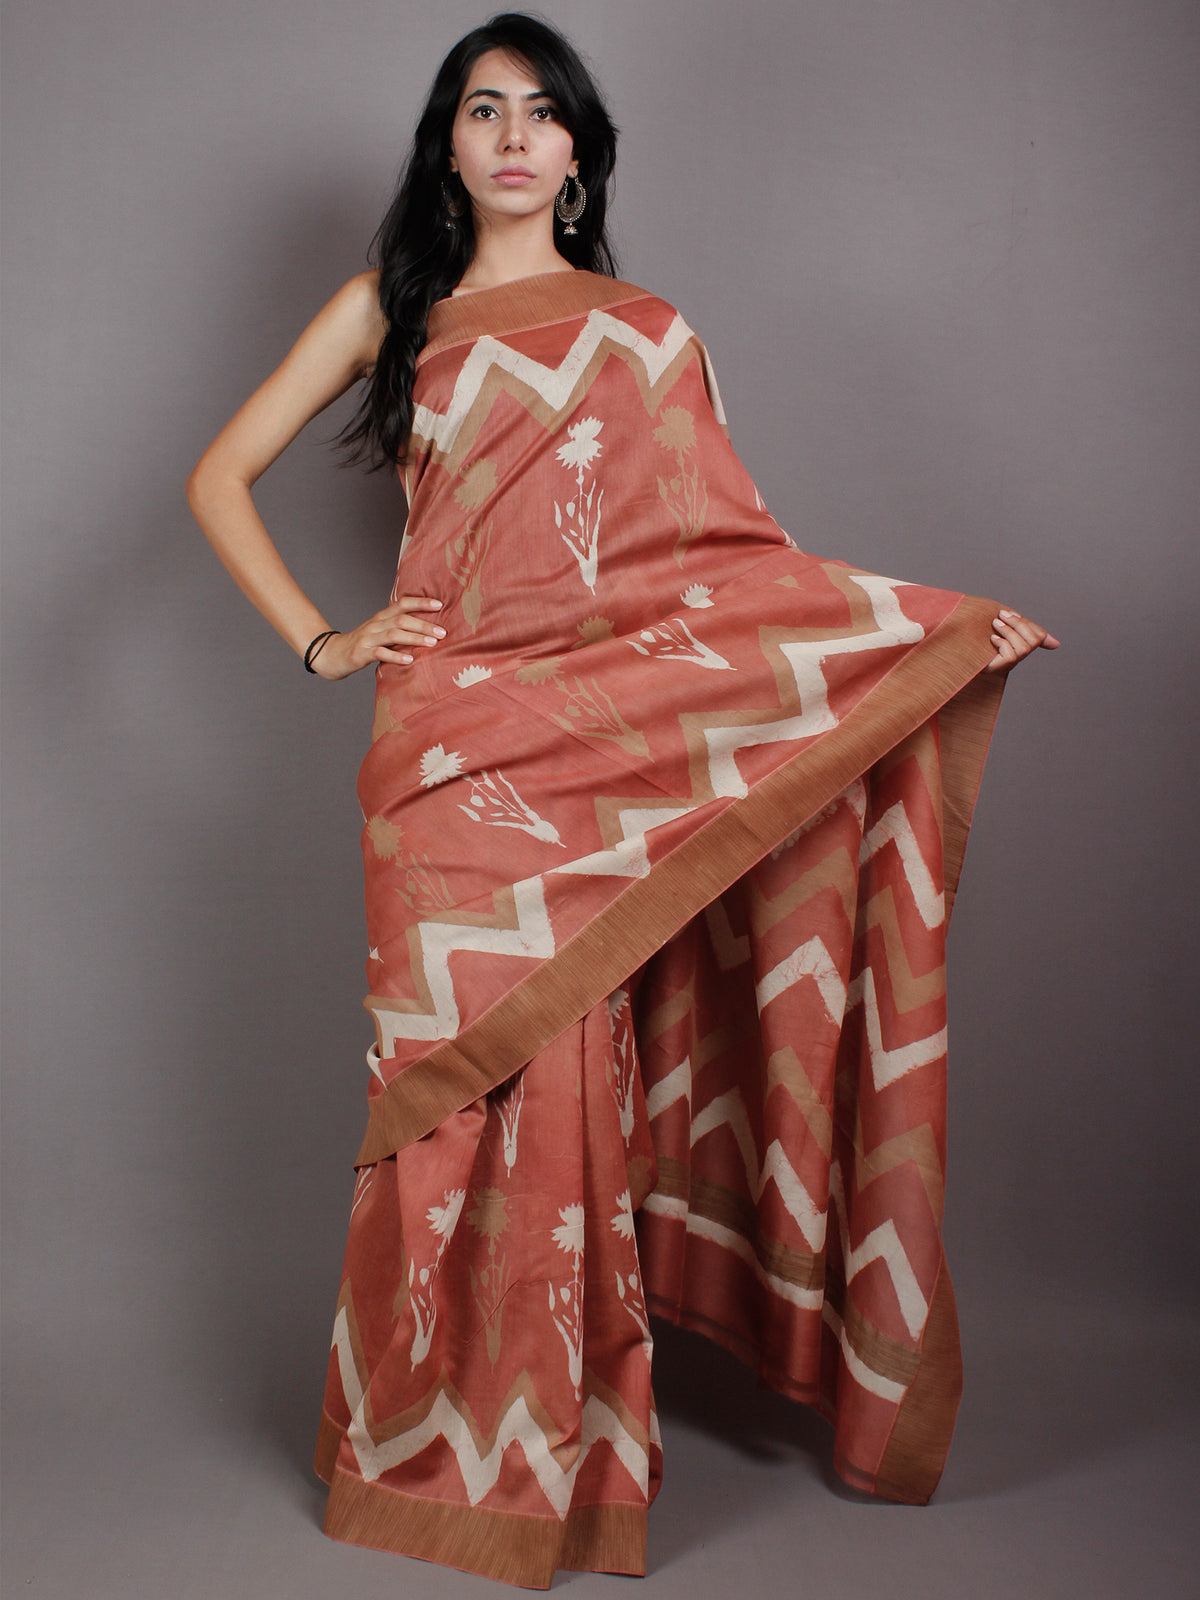 Pastel Peach Beige White Hand Block Printed in Natural Vegetable Colors Chanderi Saree With Geecha Border - S03170515